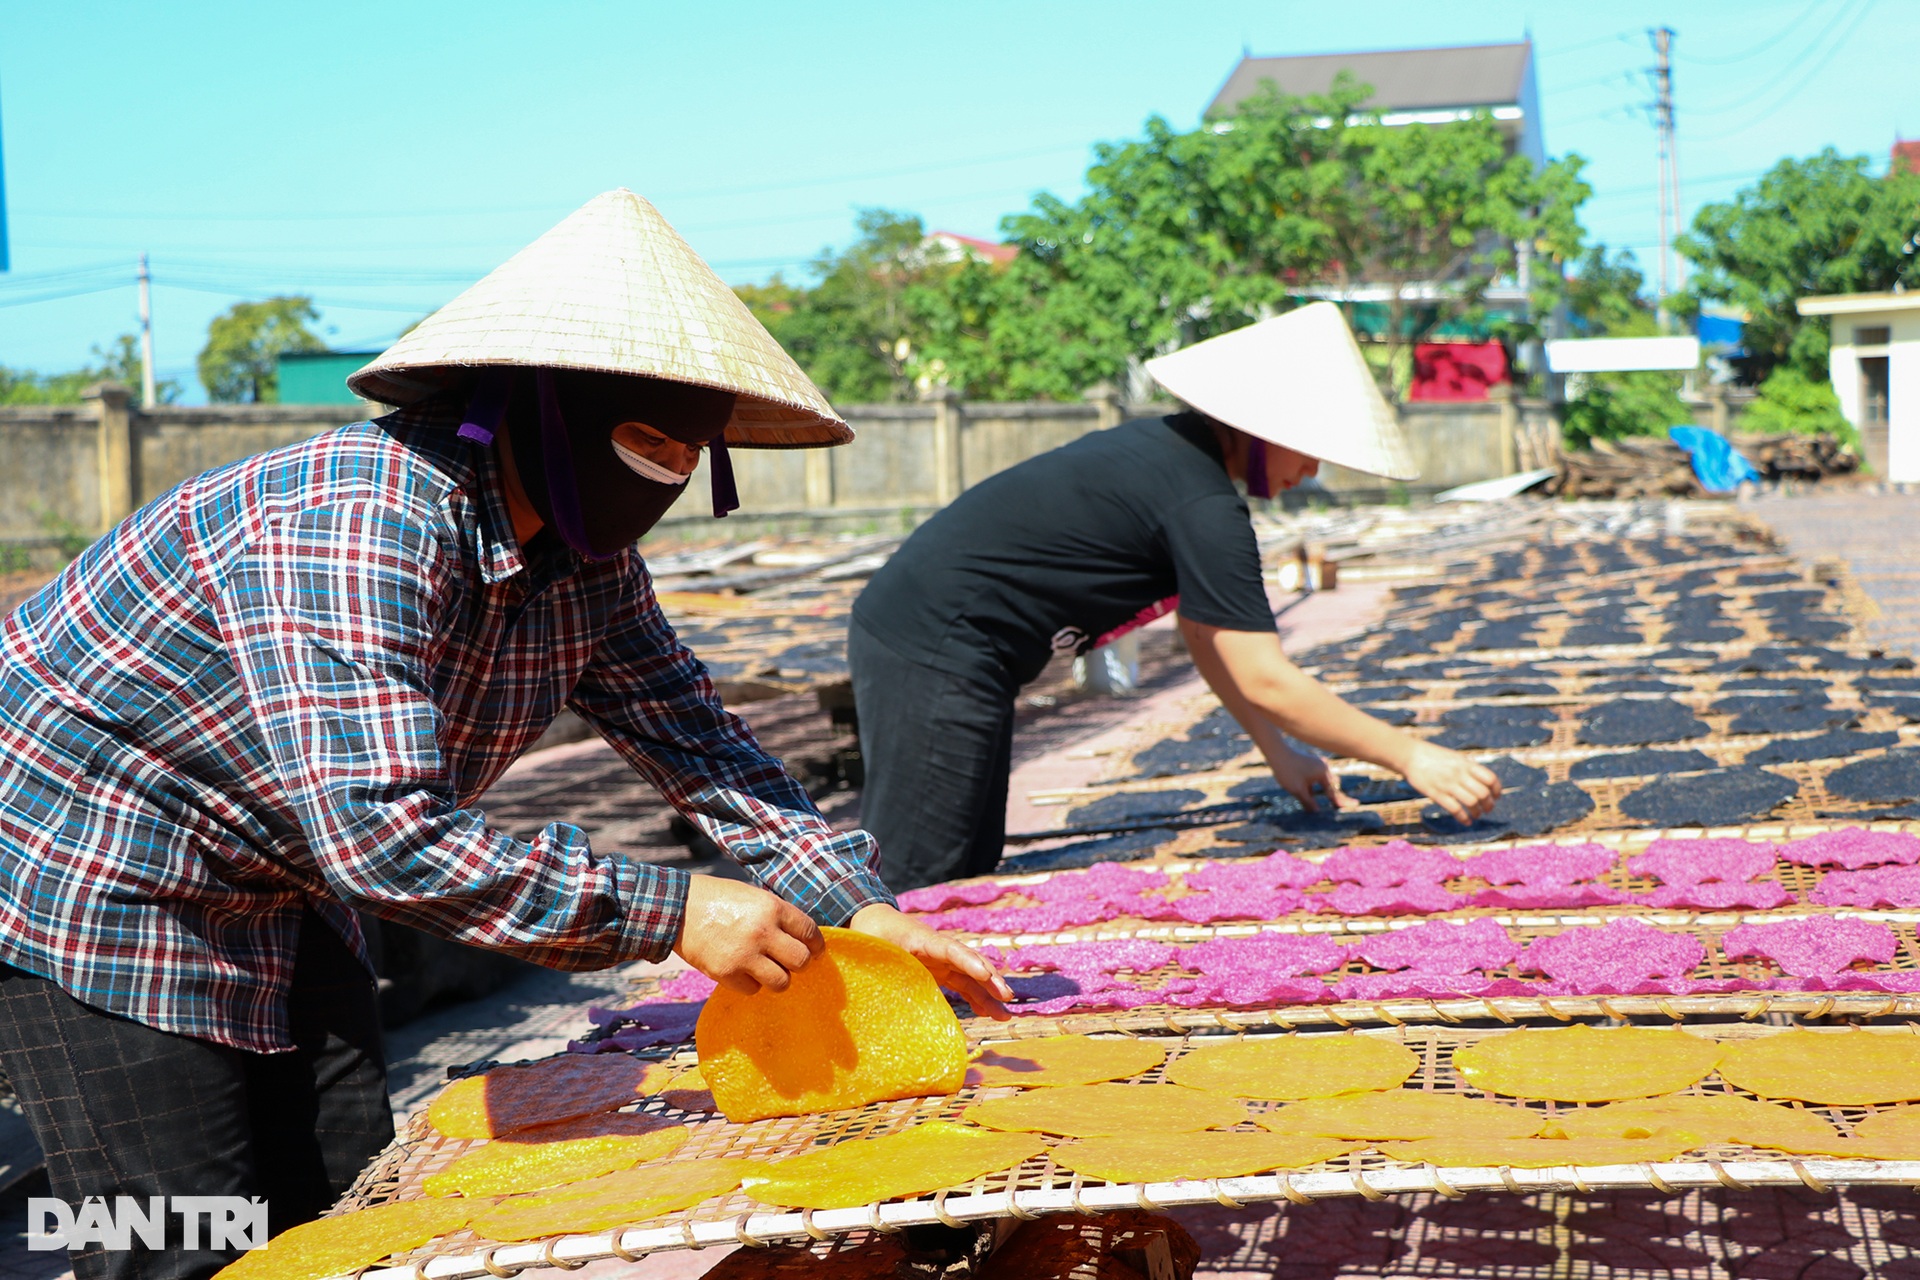 A place where women cook and dry in the sun to create a cake that brings in 4.5 billion VND per year - 8